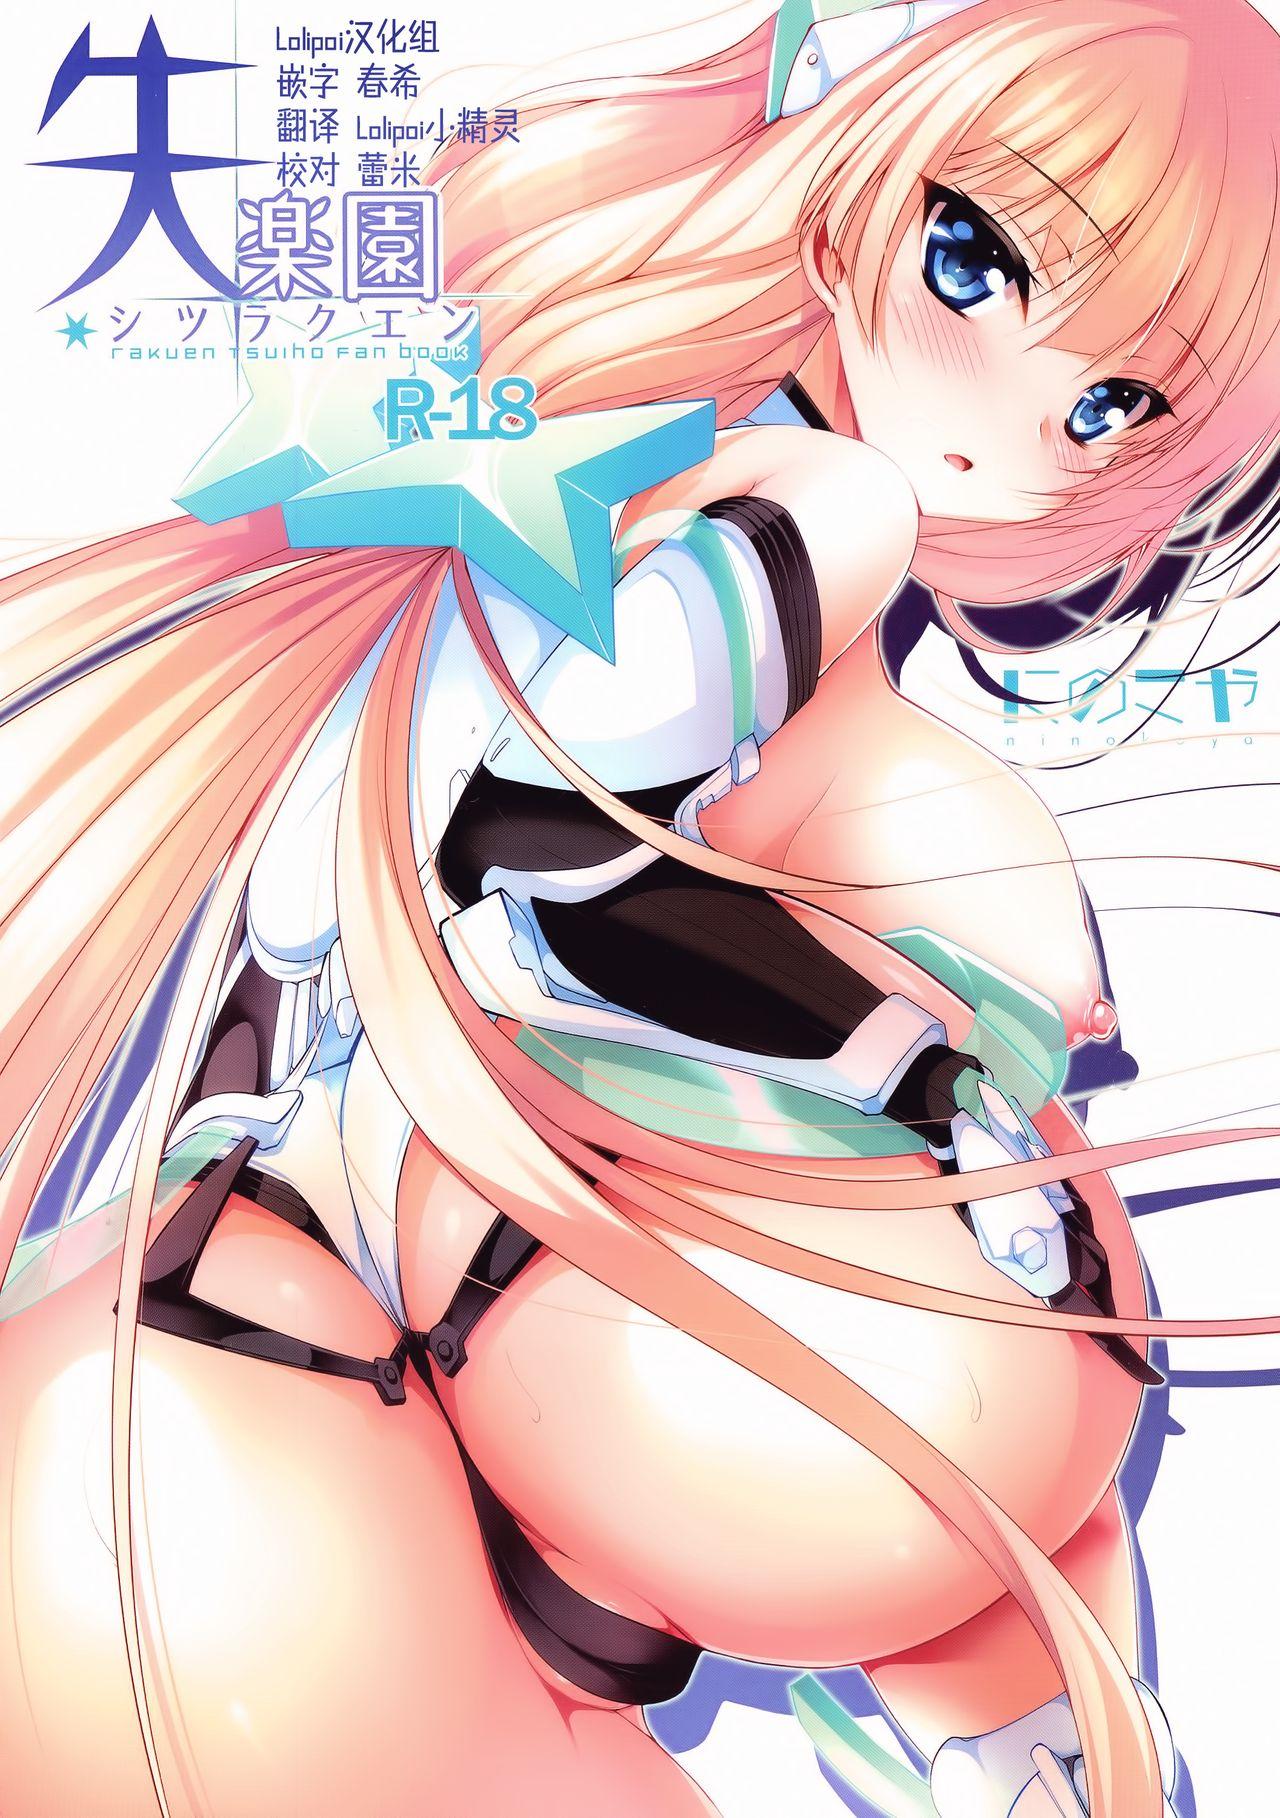 Porno Amateur Shiturakuen - Expelled from paradise With - Picture 1